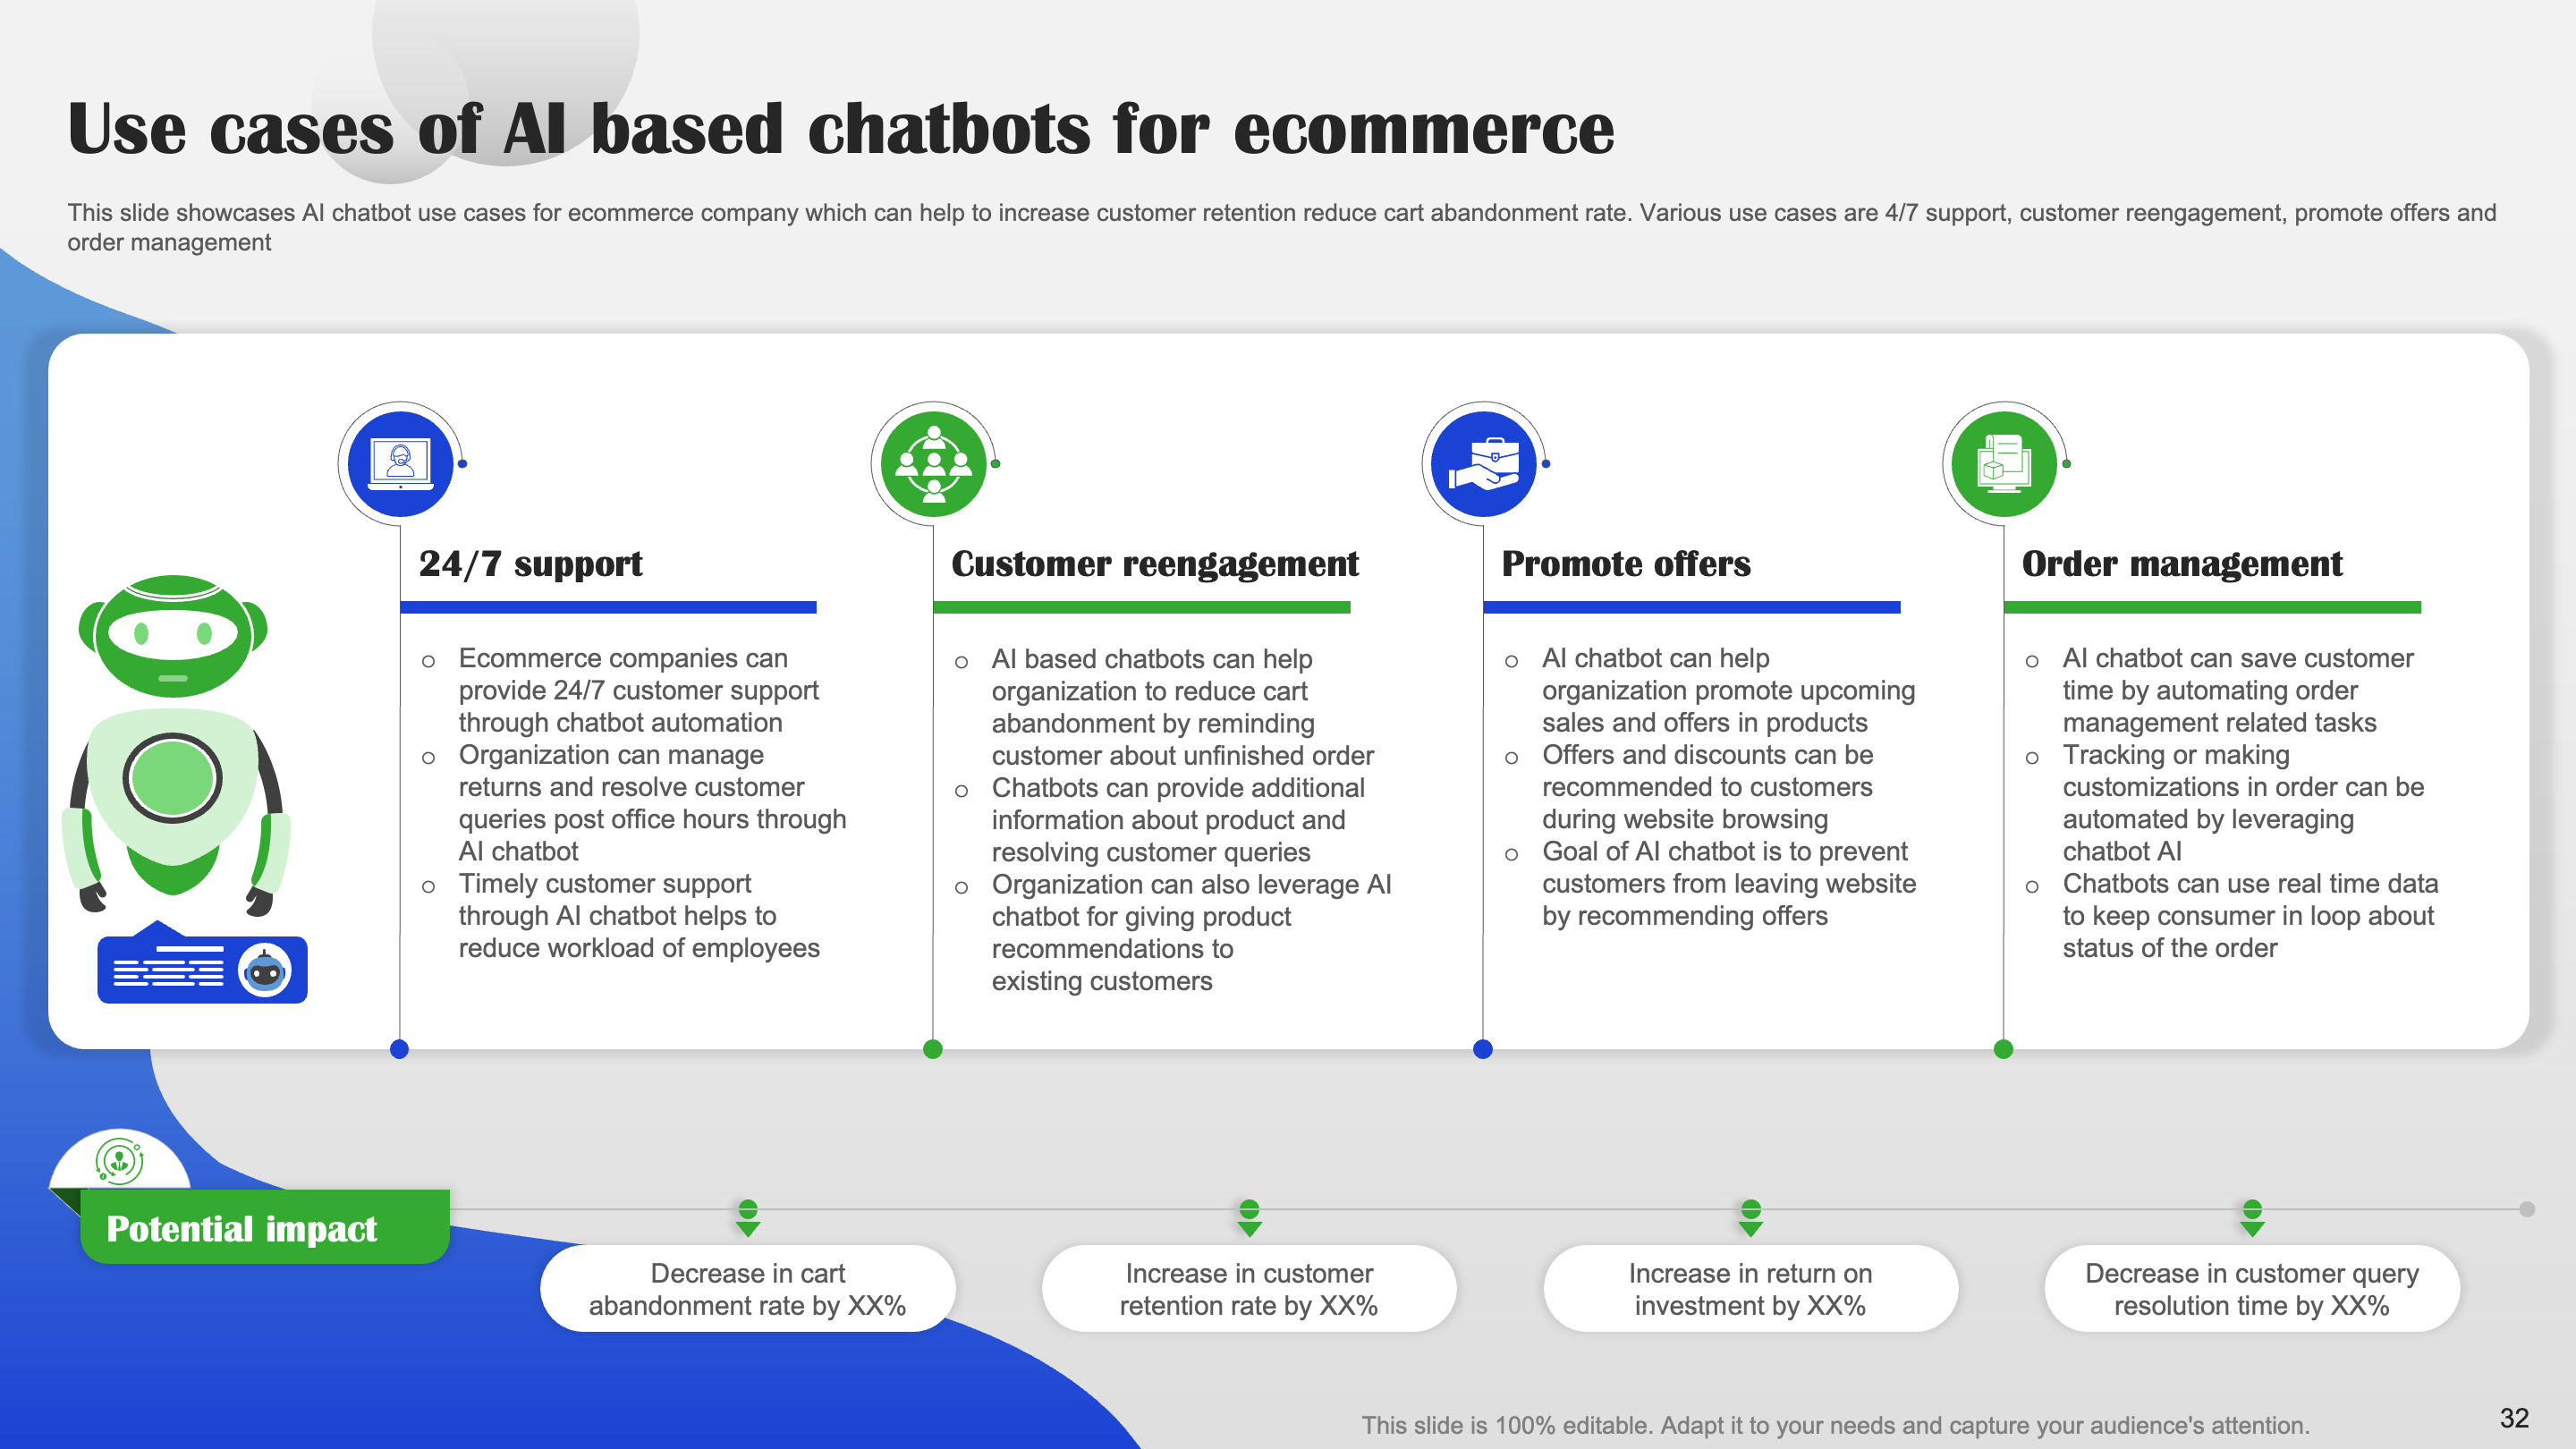 Use Cases of Chatbots for Ecommerce